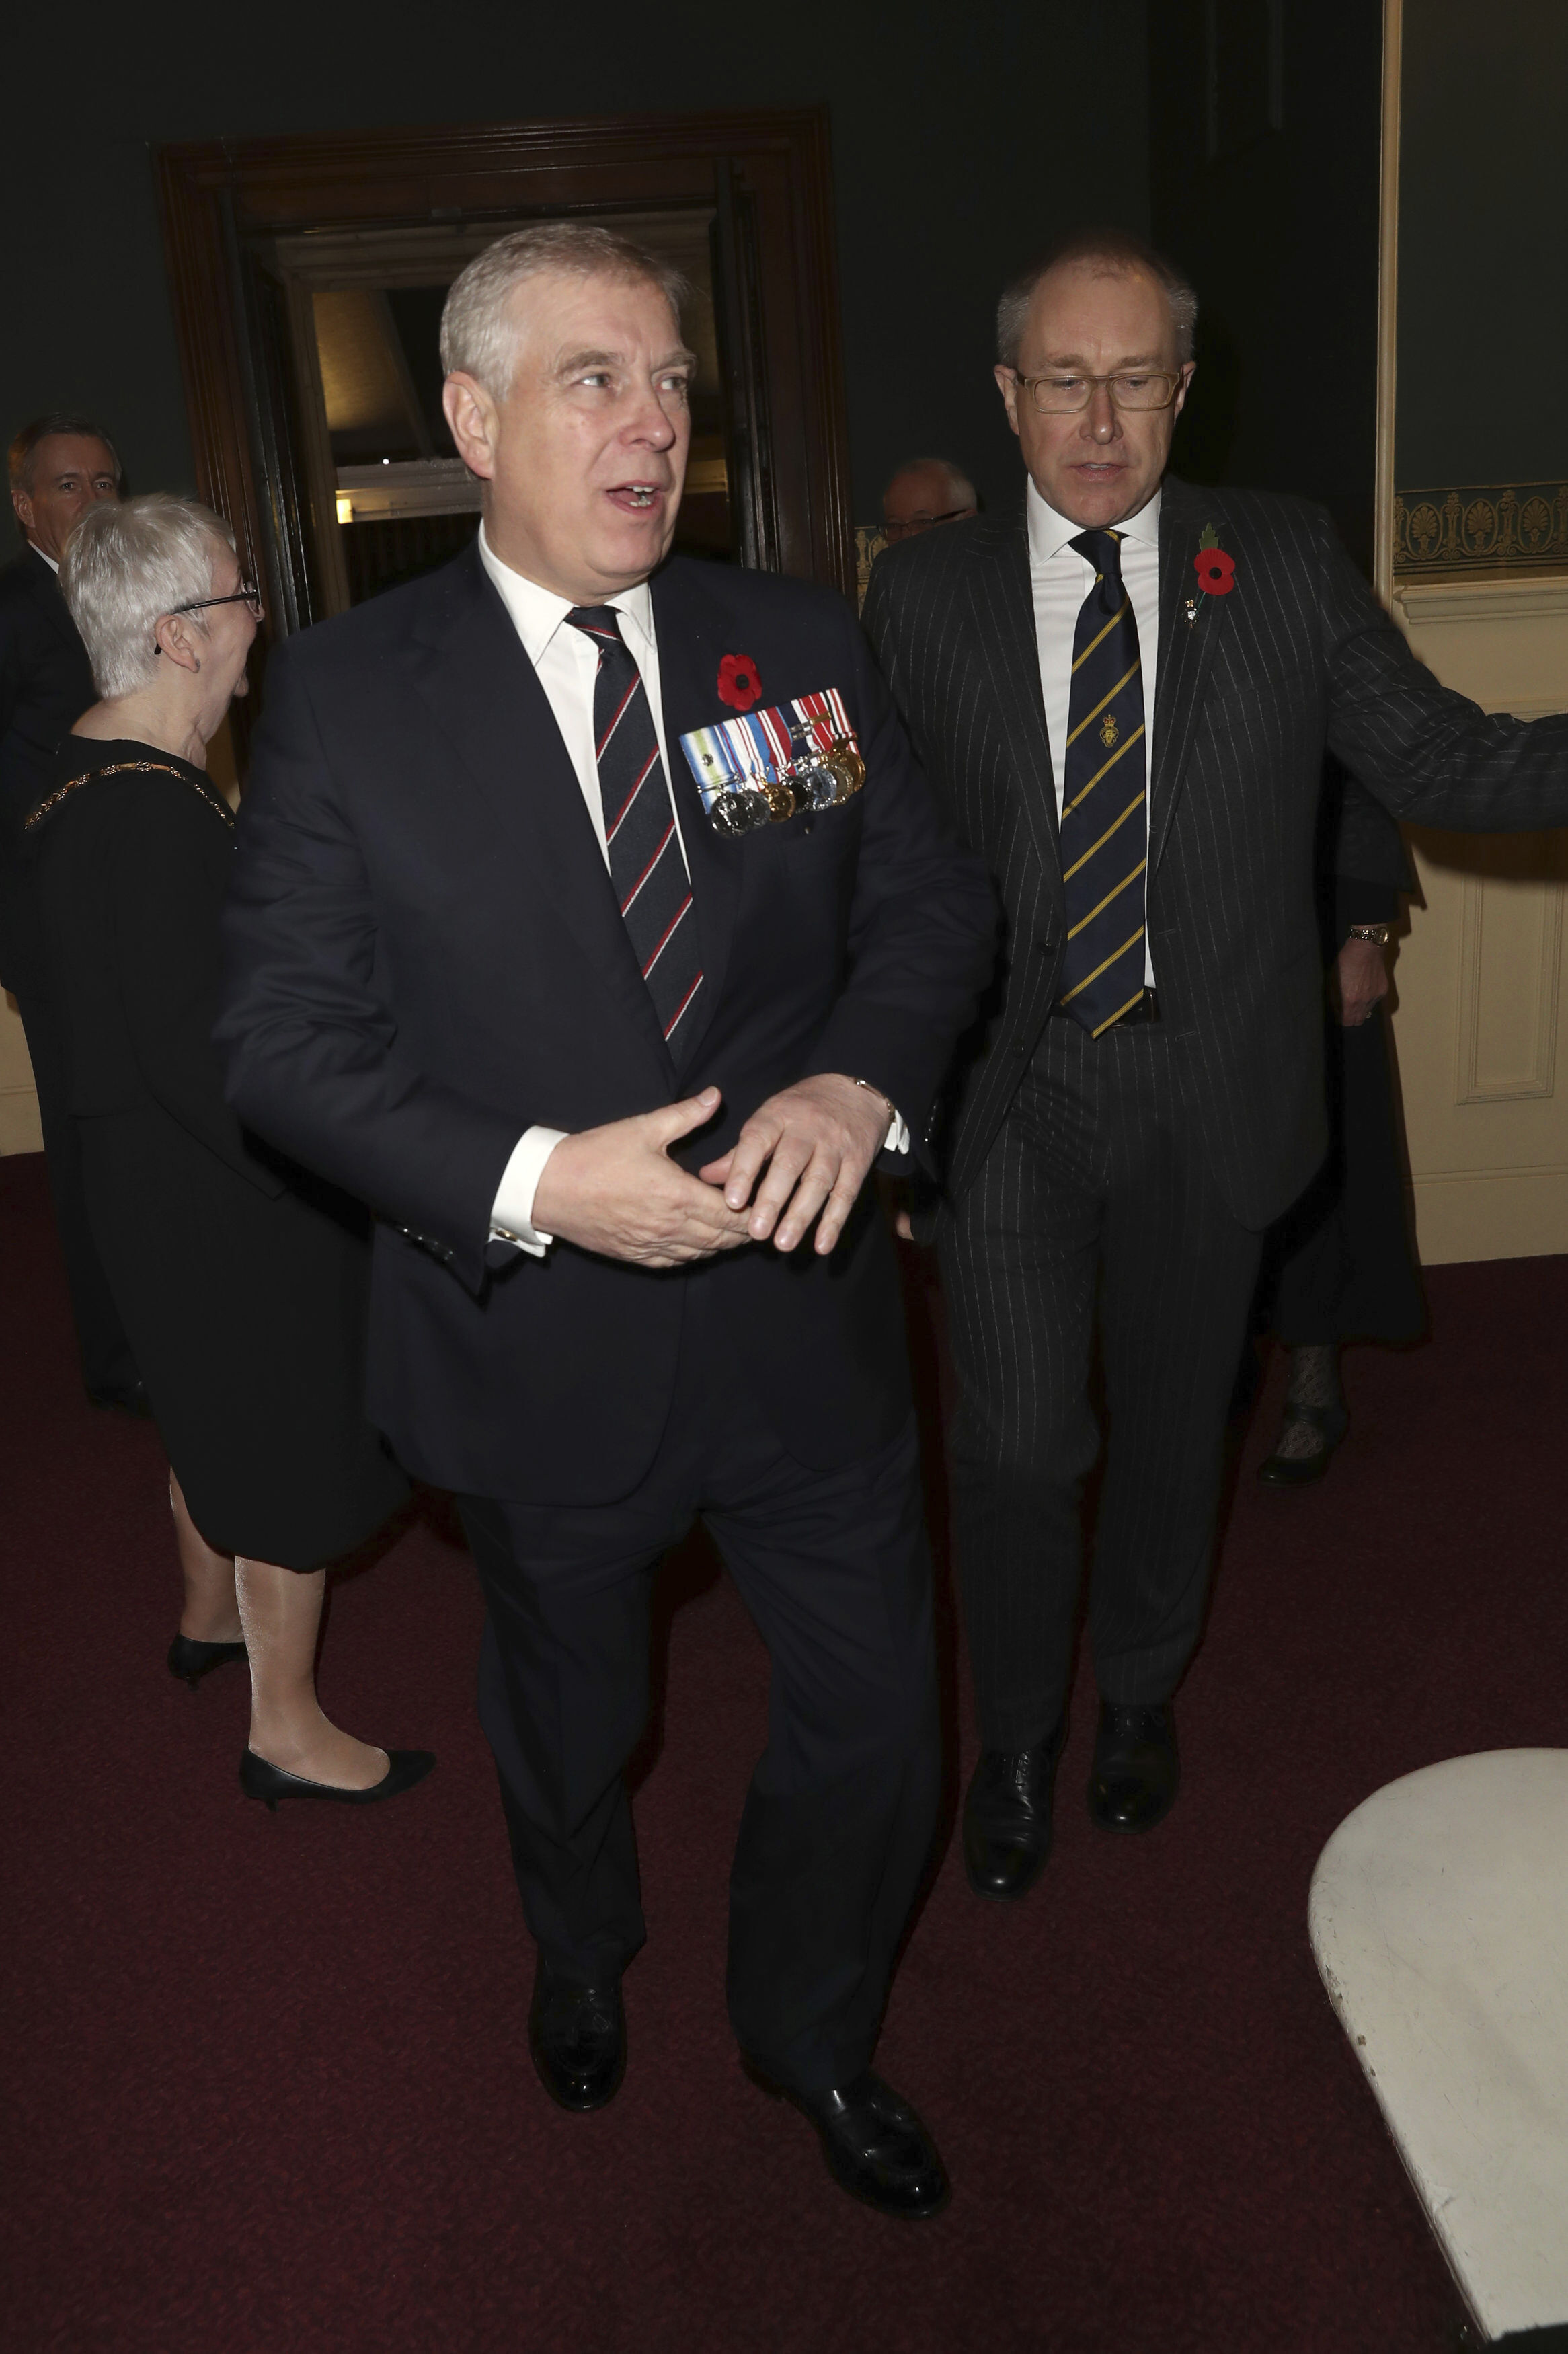 Prince Andrew arrives for the annual Royal British Legion Festival of Remembrance, at the Royal Albert Hall in Kensington, London, Saturday, November 9, 2019